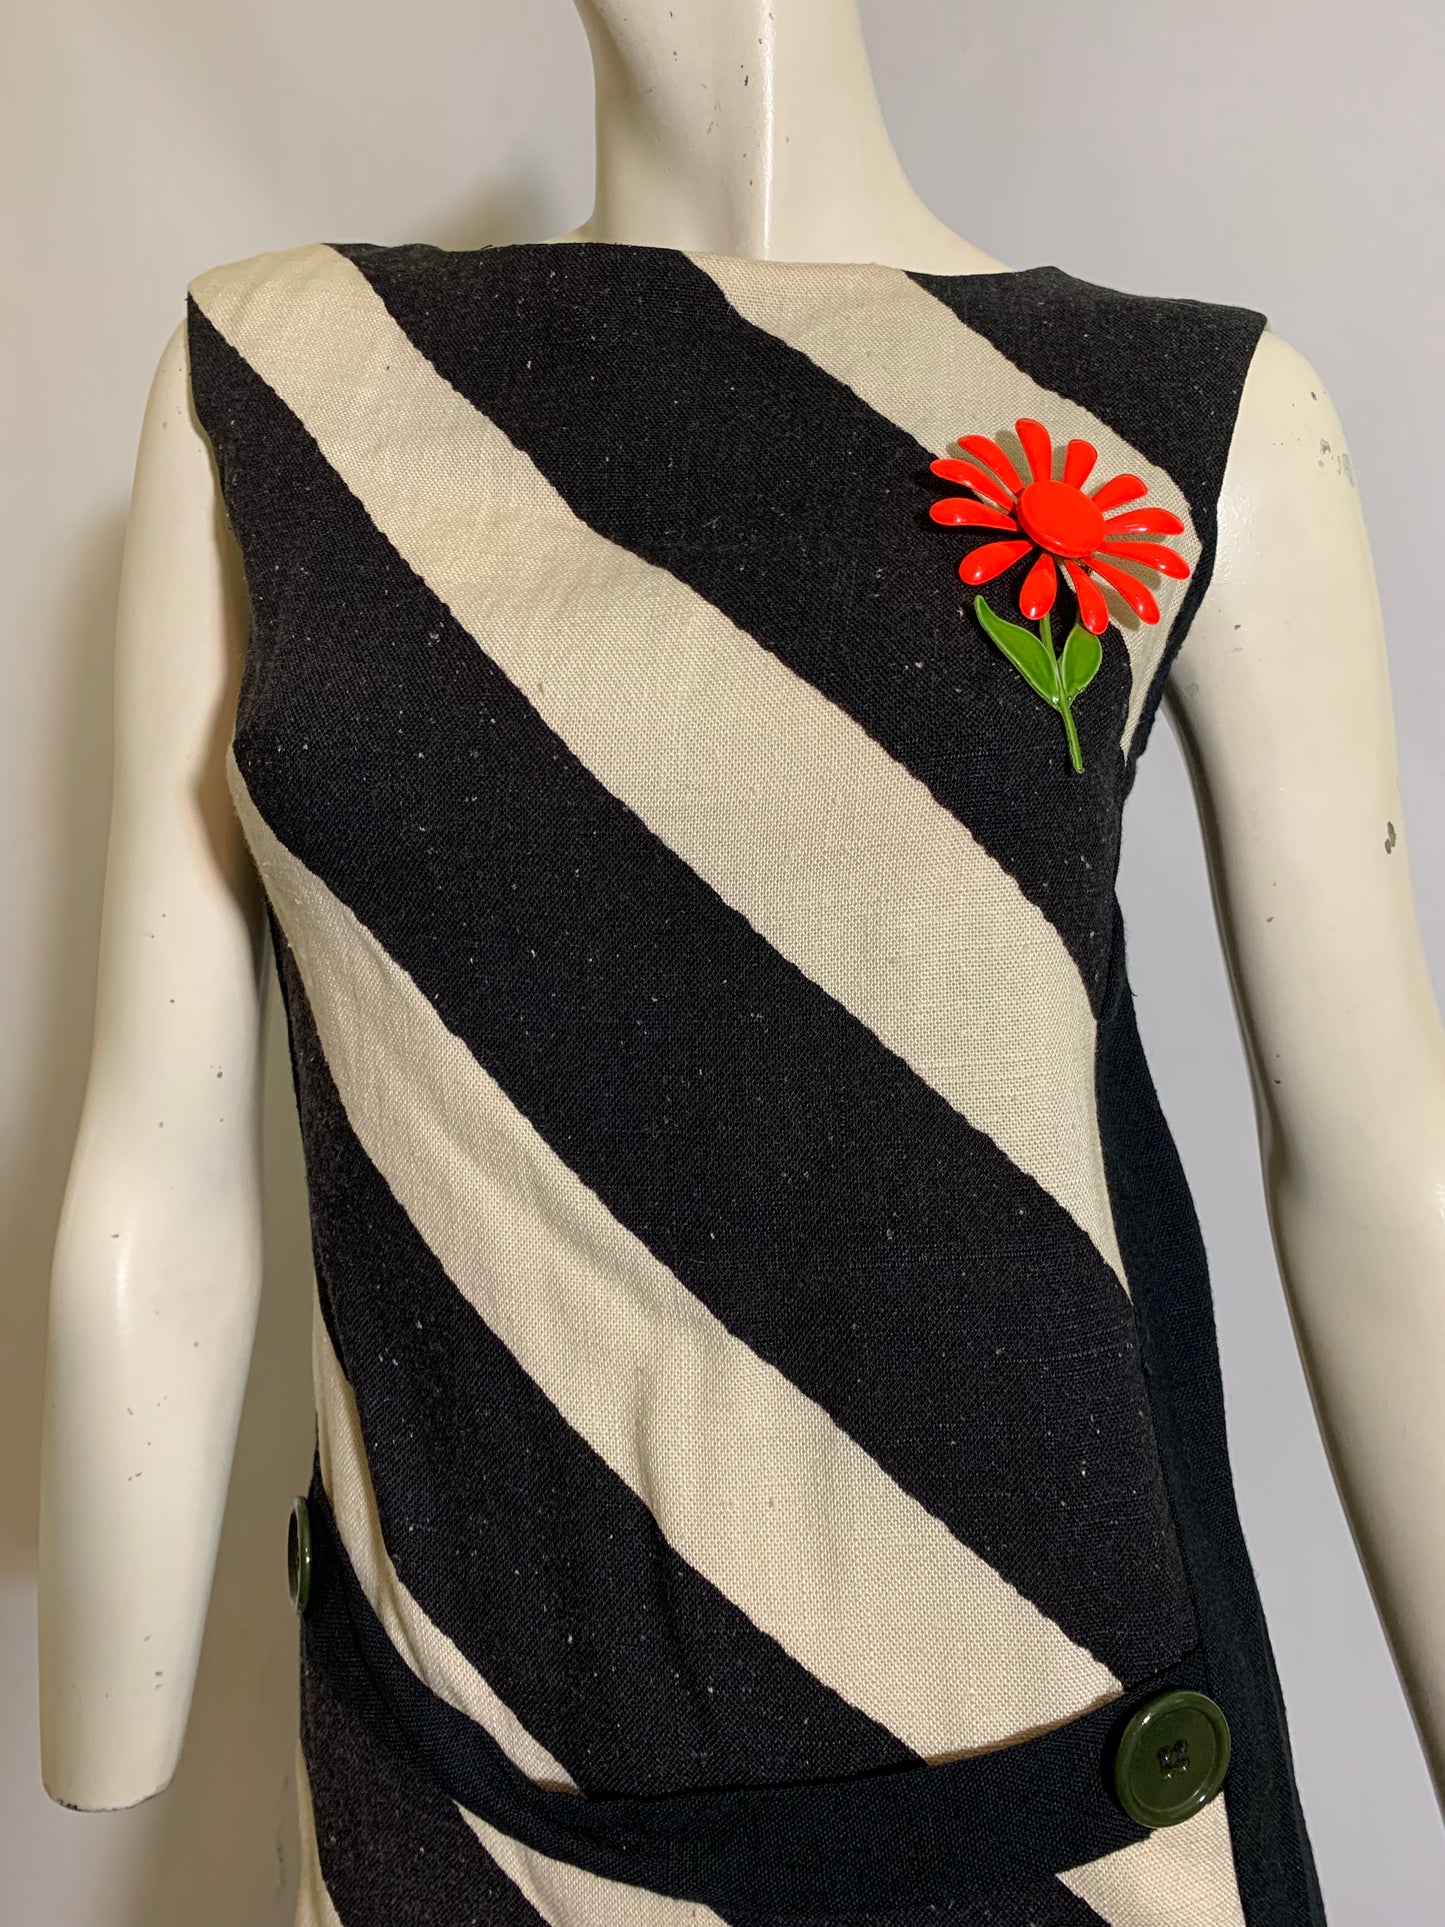 Speckled Black and Off White Striped Shift Dress circa 1960s